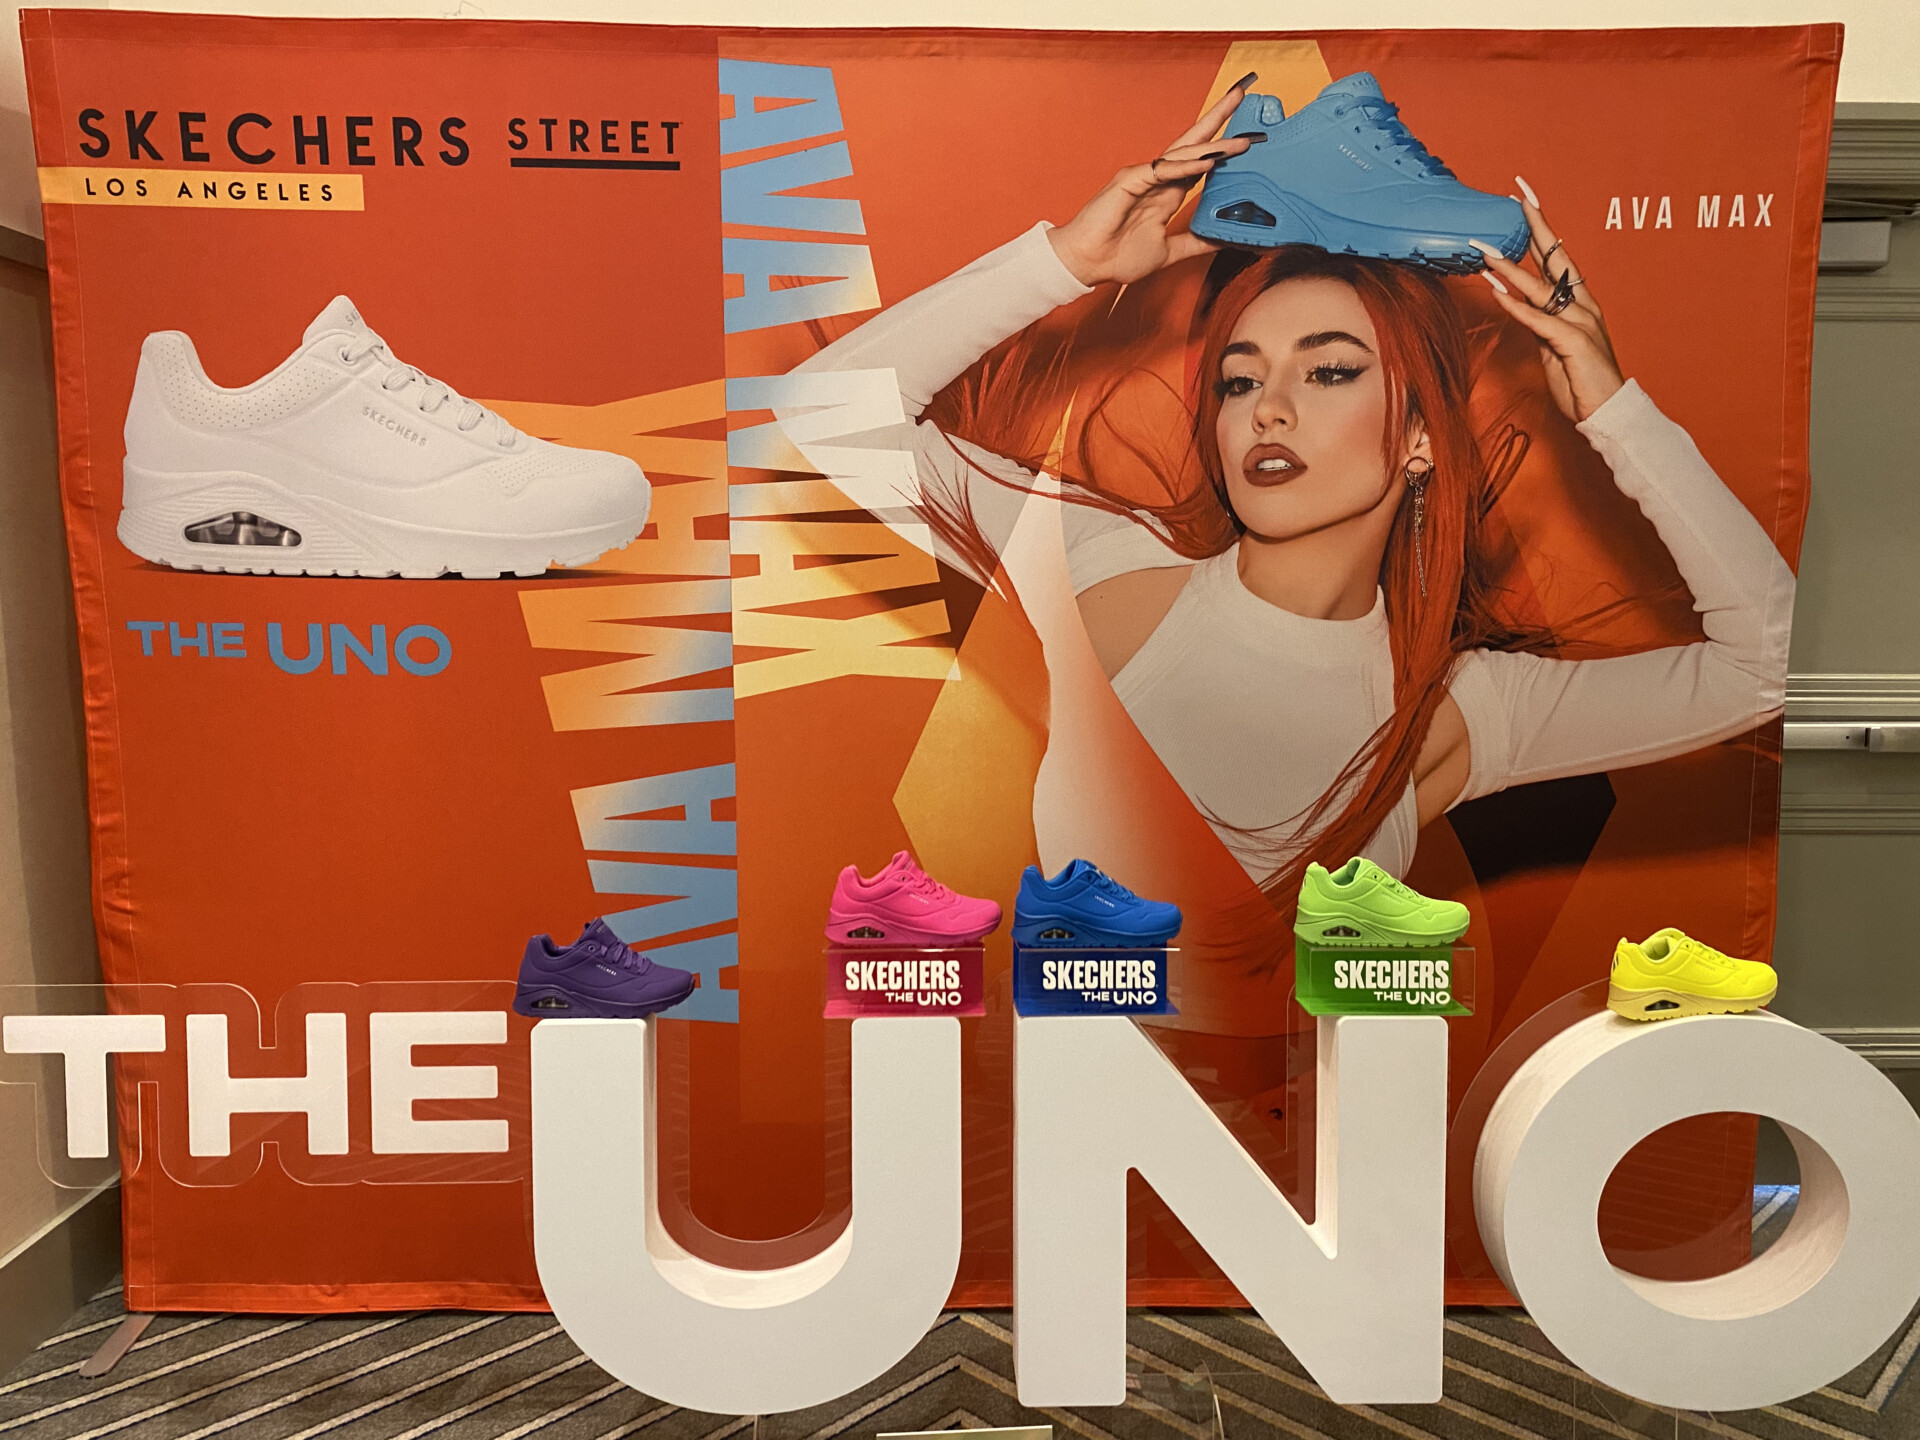 In-Store Displays and Signage for Skechers that POPS!